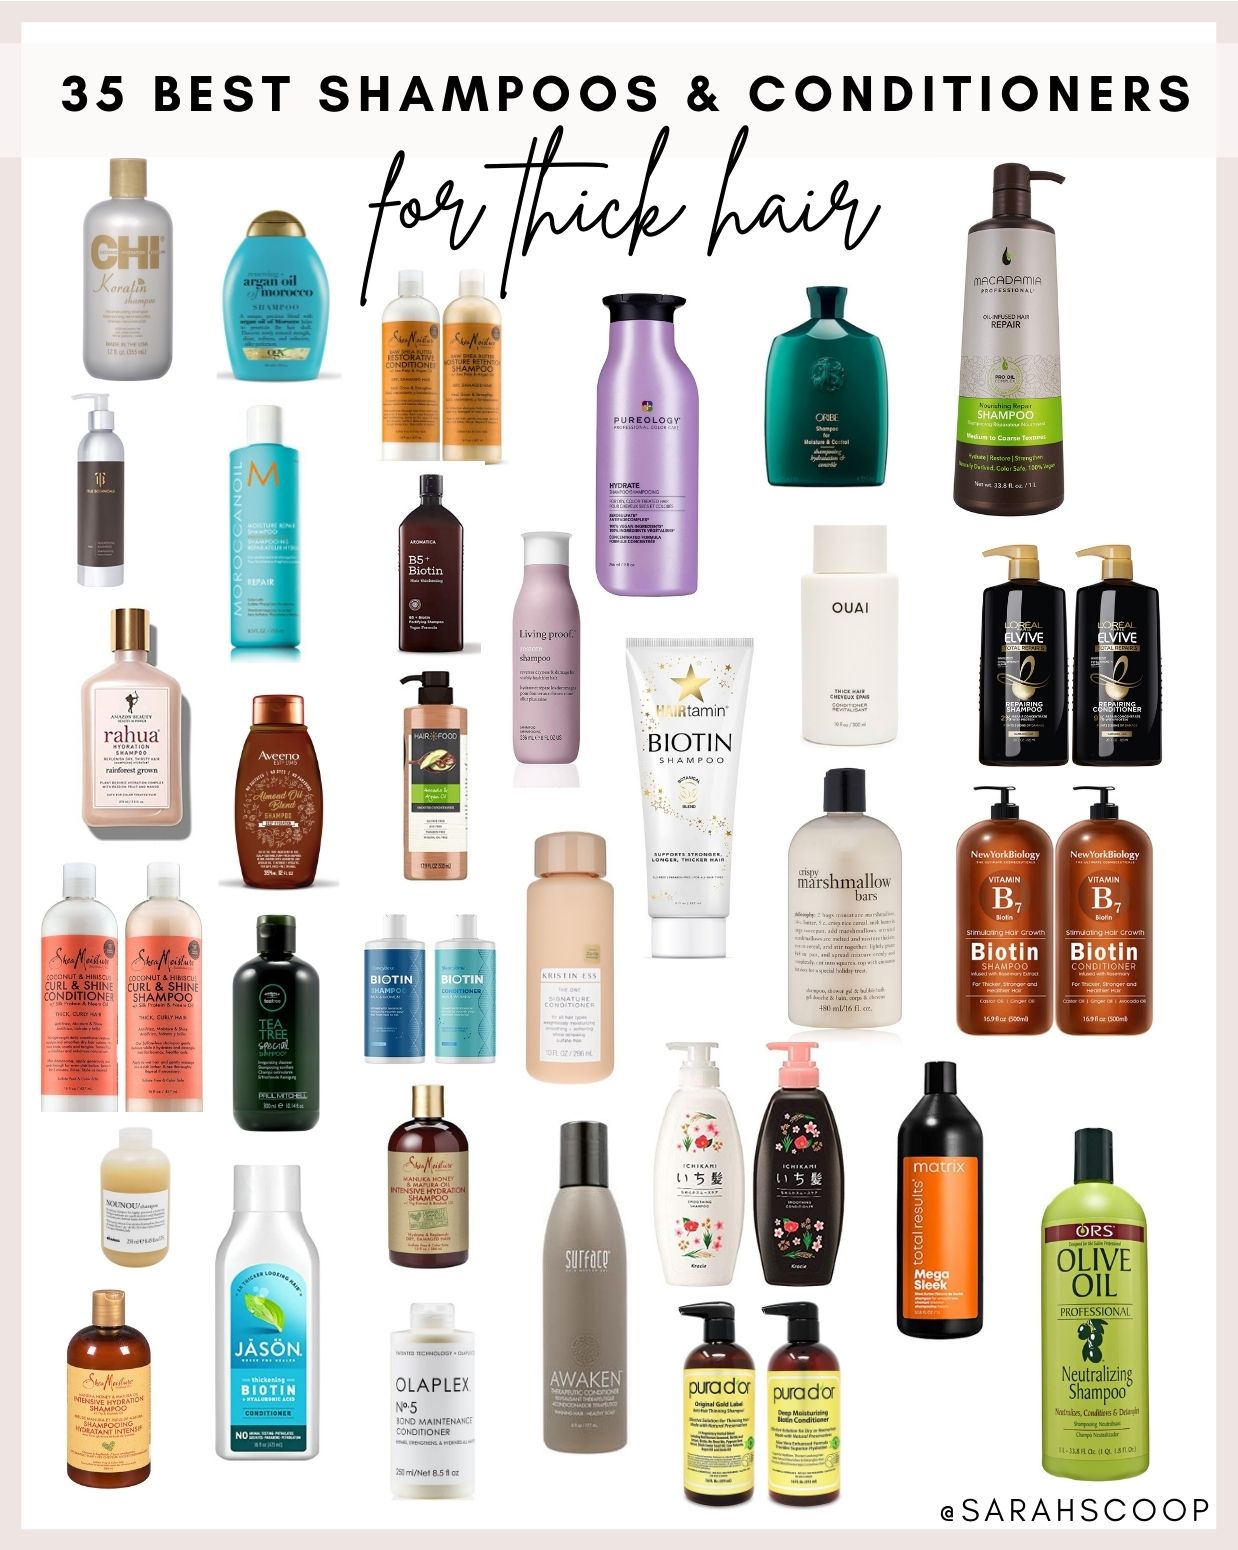 35 Best Shampoos and Conditioners For Thick Hair - Sarah Scoop